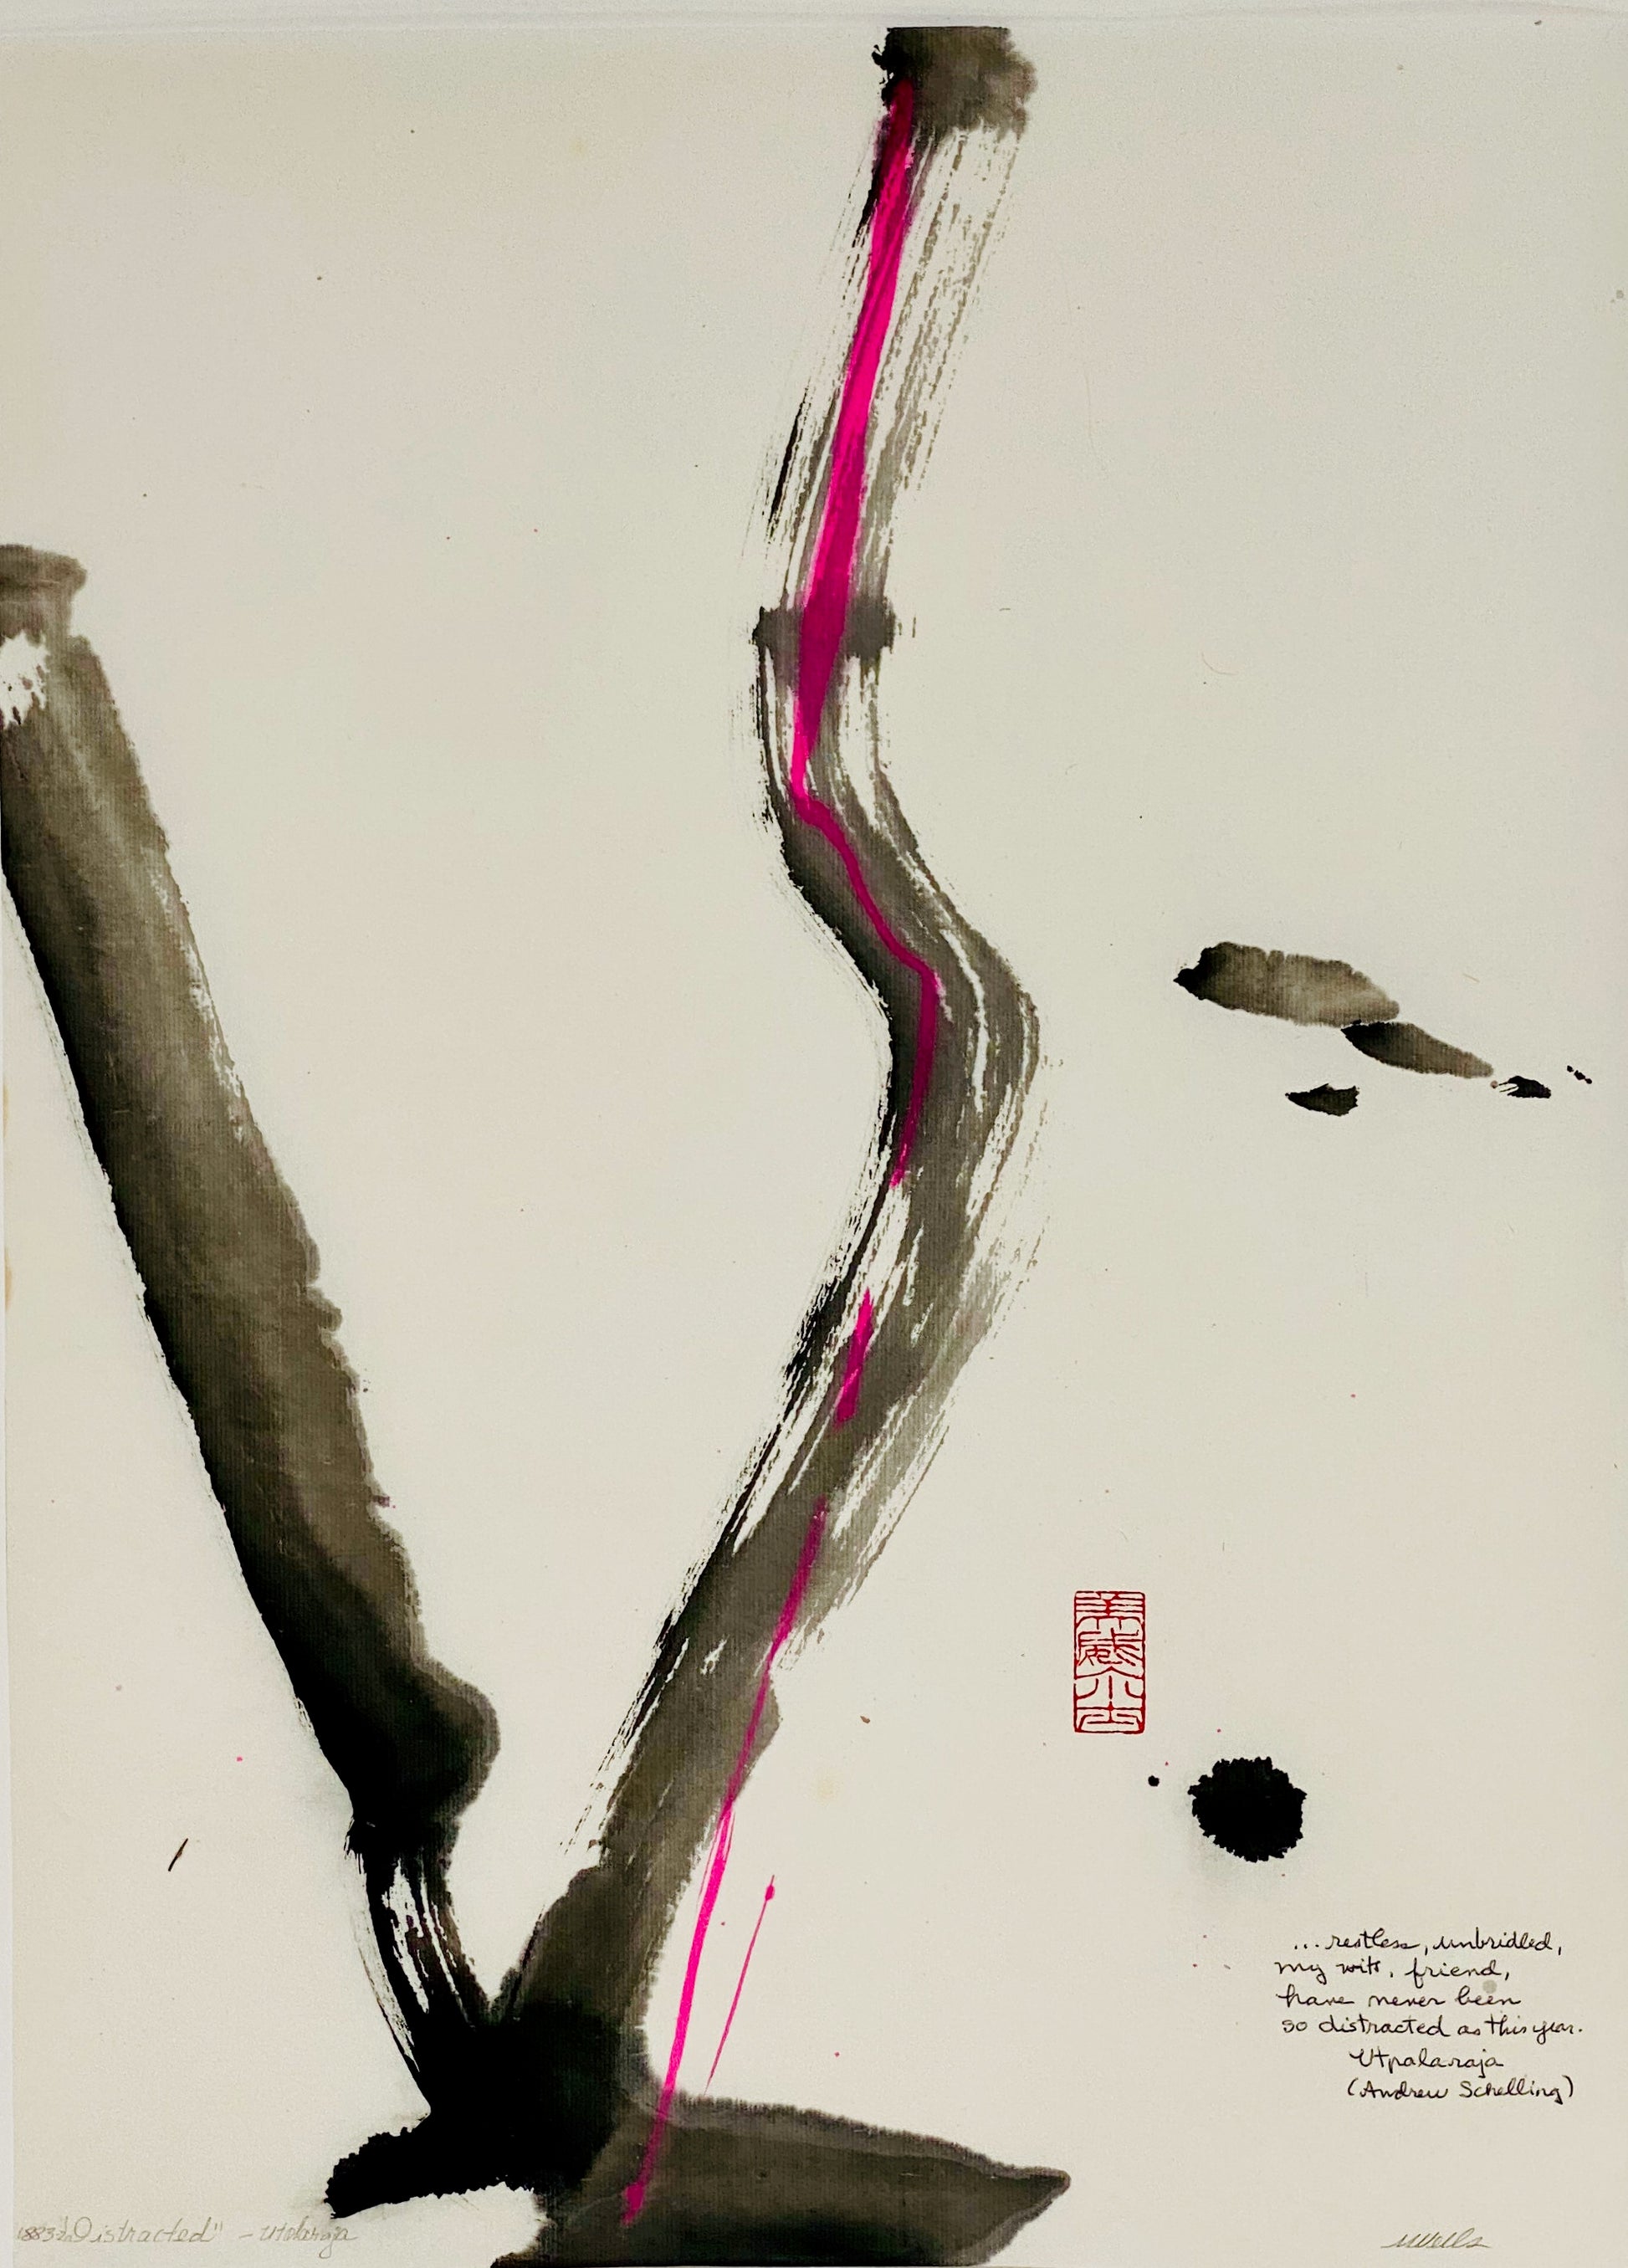 Abstract sumi e original “Distracted” by Marilyn Wells